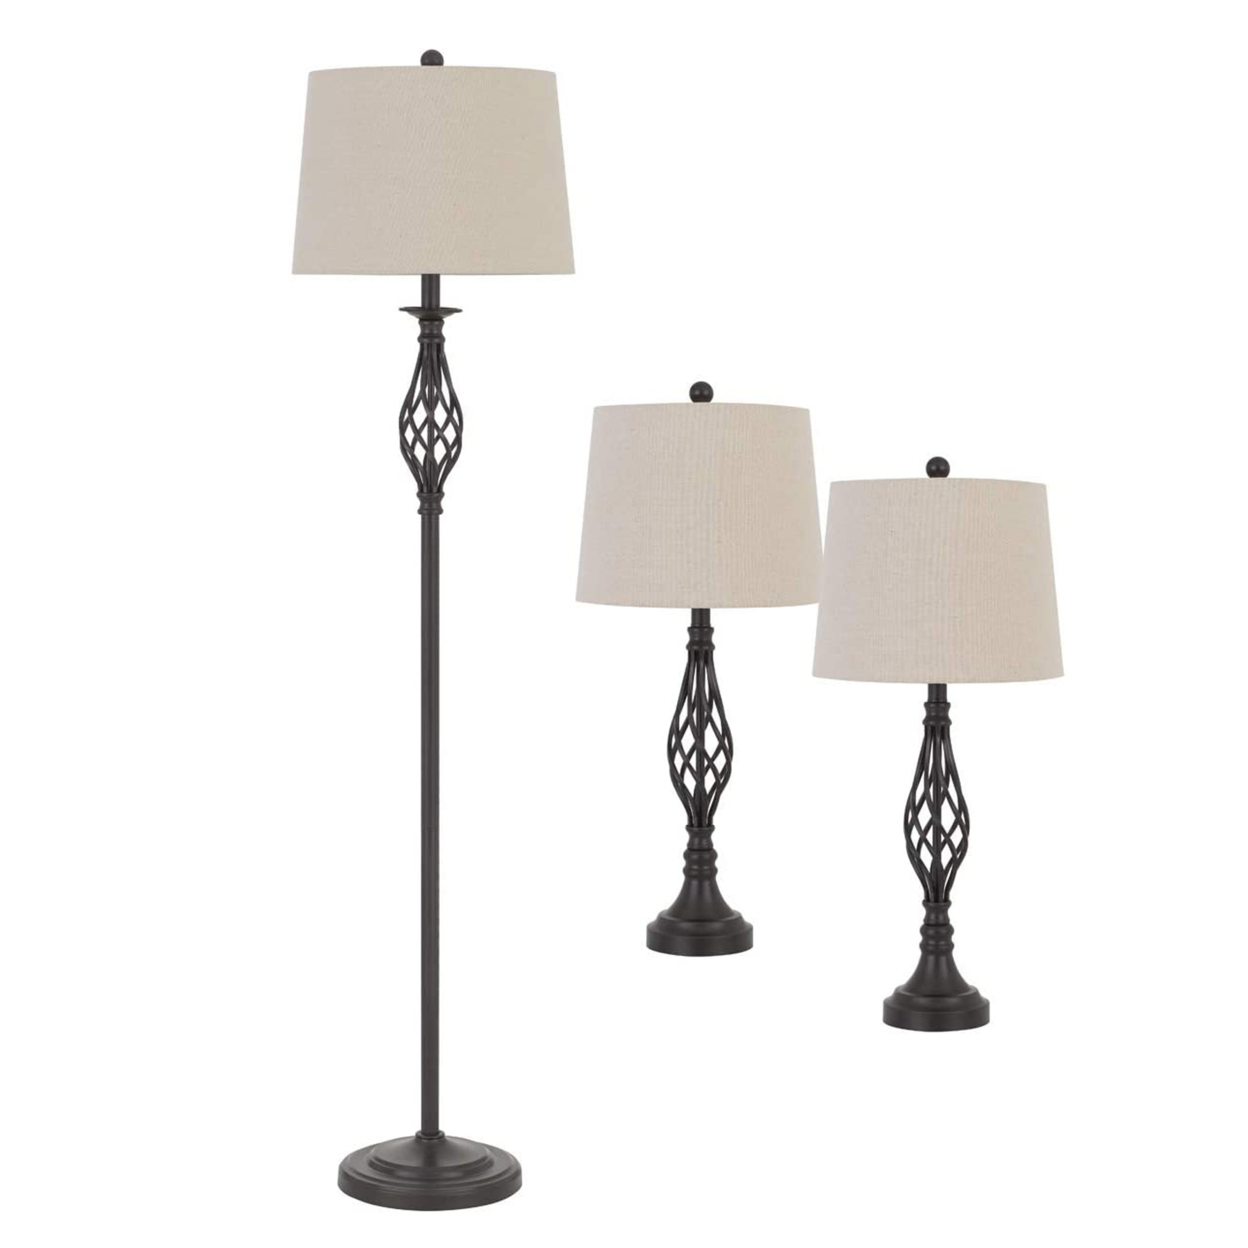 Twisted Cage Design Metal Floor Lamp With 2 Table Lamps, Bronze- Saltoro Sherpi